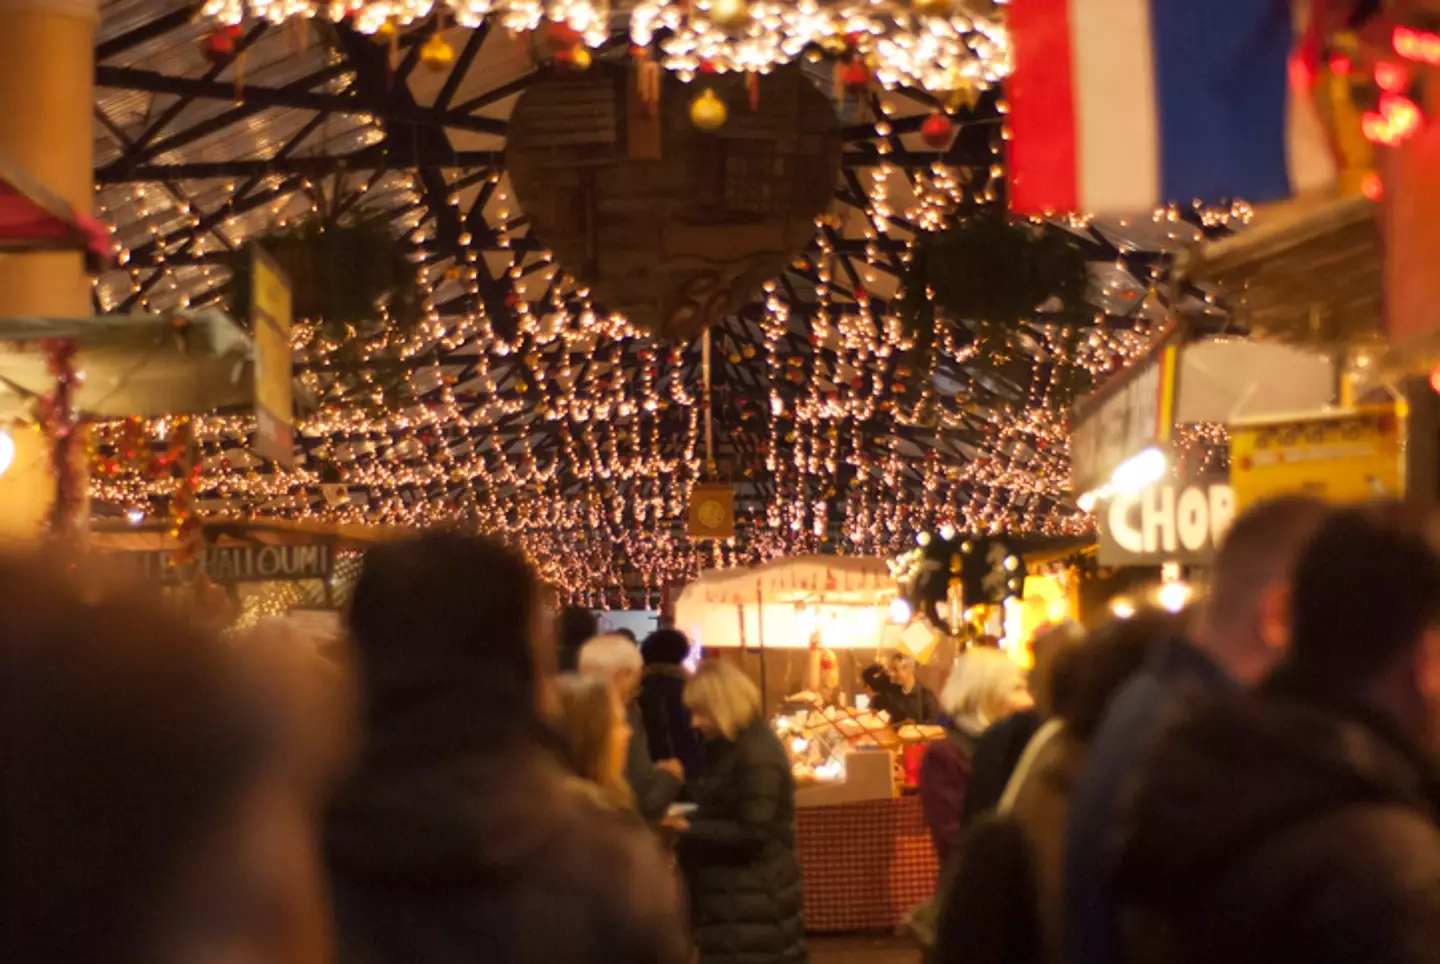 Indulge in some specialist hot food at the Kingston upon Thames Christmas Market.